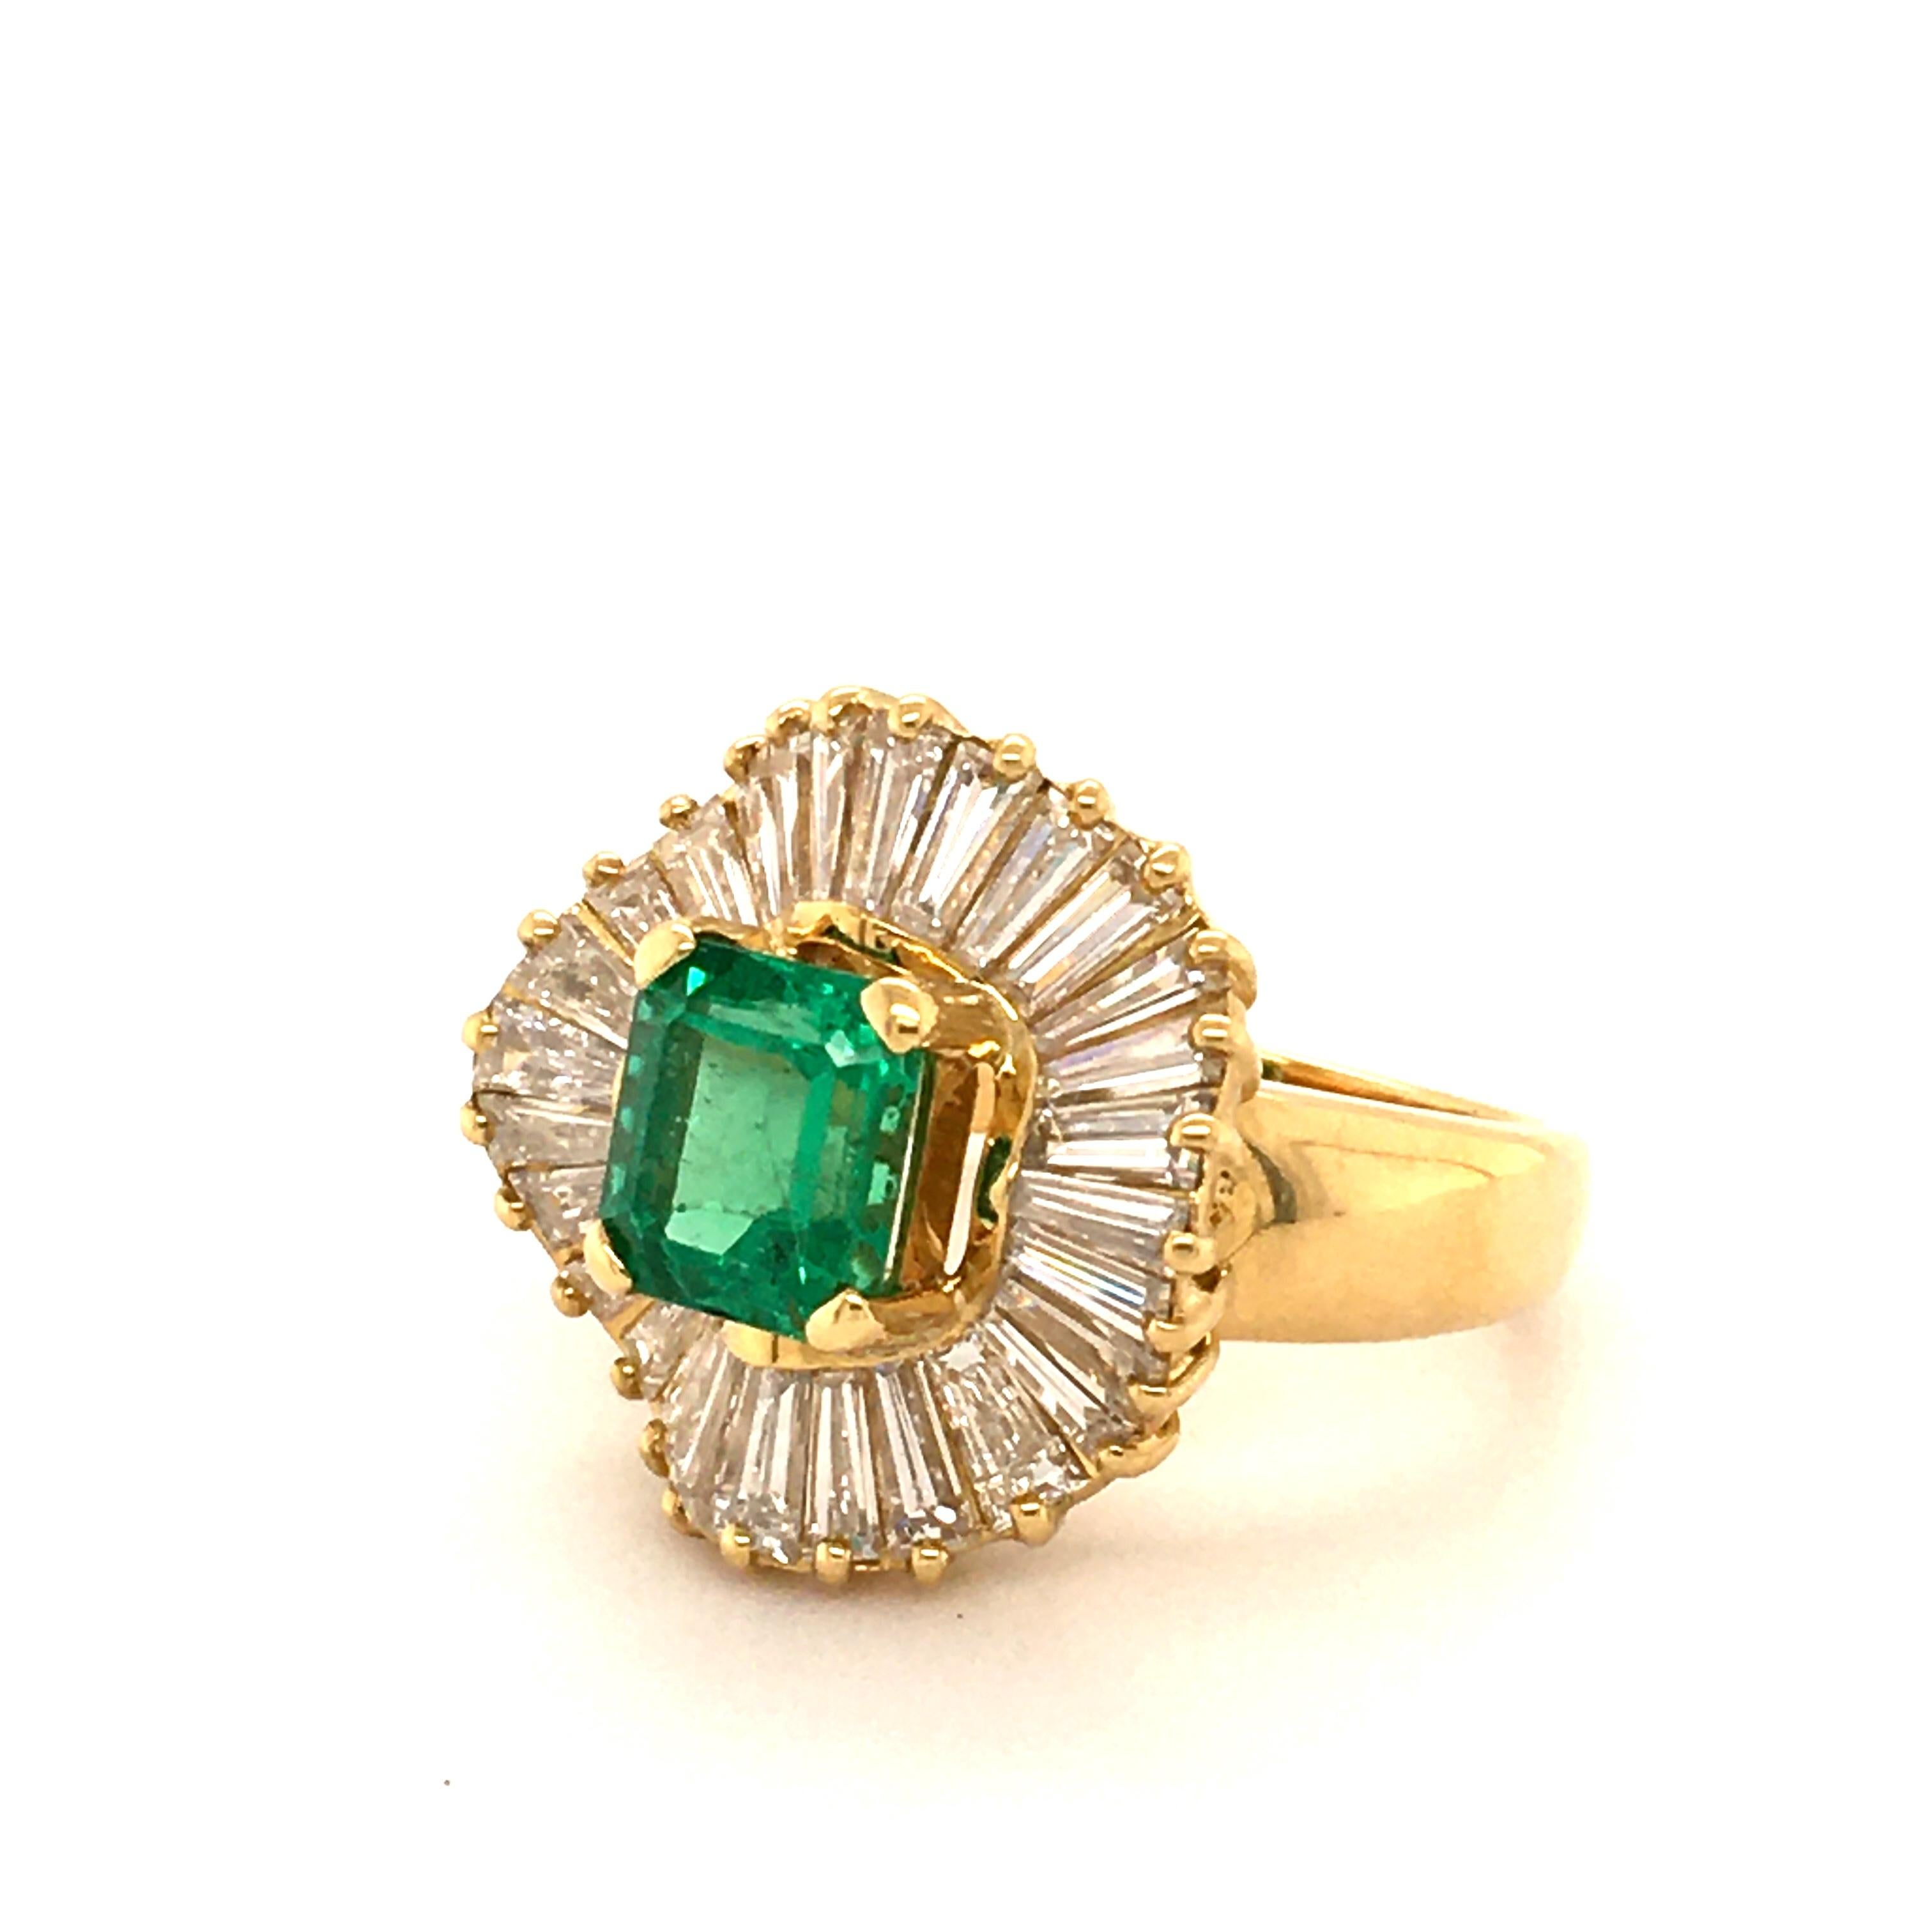 This beautiful ring in 18 karat yellow gold features a lively green emerald of approximately 2.10 carats. The octagonal cut emerald is haloed by 28 tapered-cut diamonds of G/H colour and vs clarity, total weight approximately 3.50 carats.

Ring